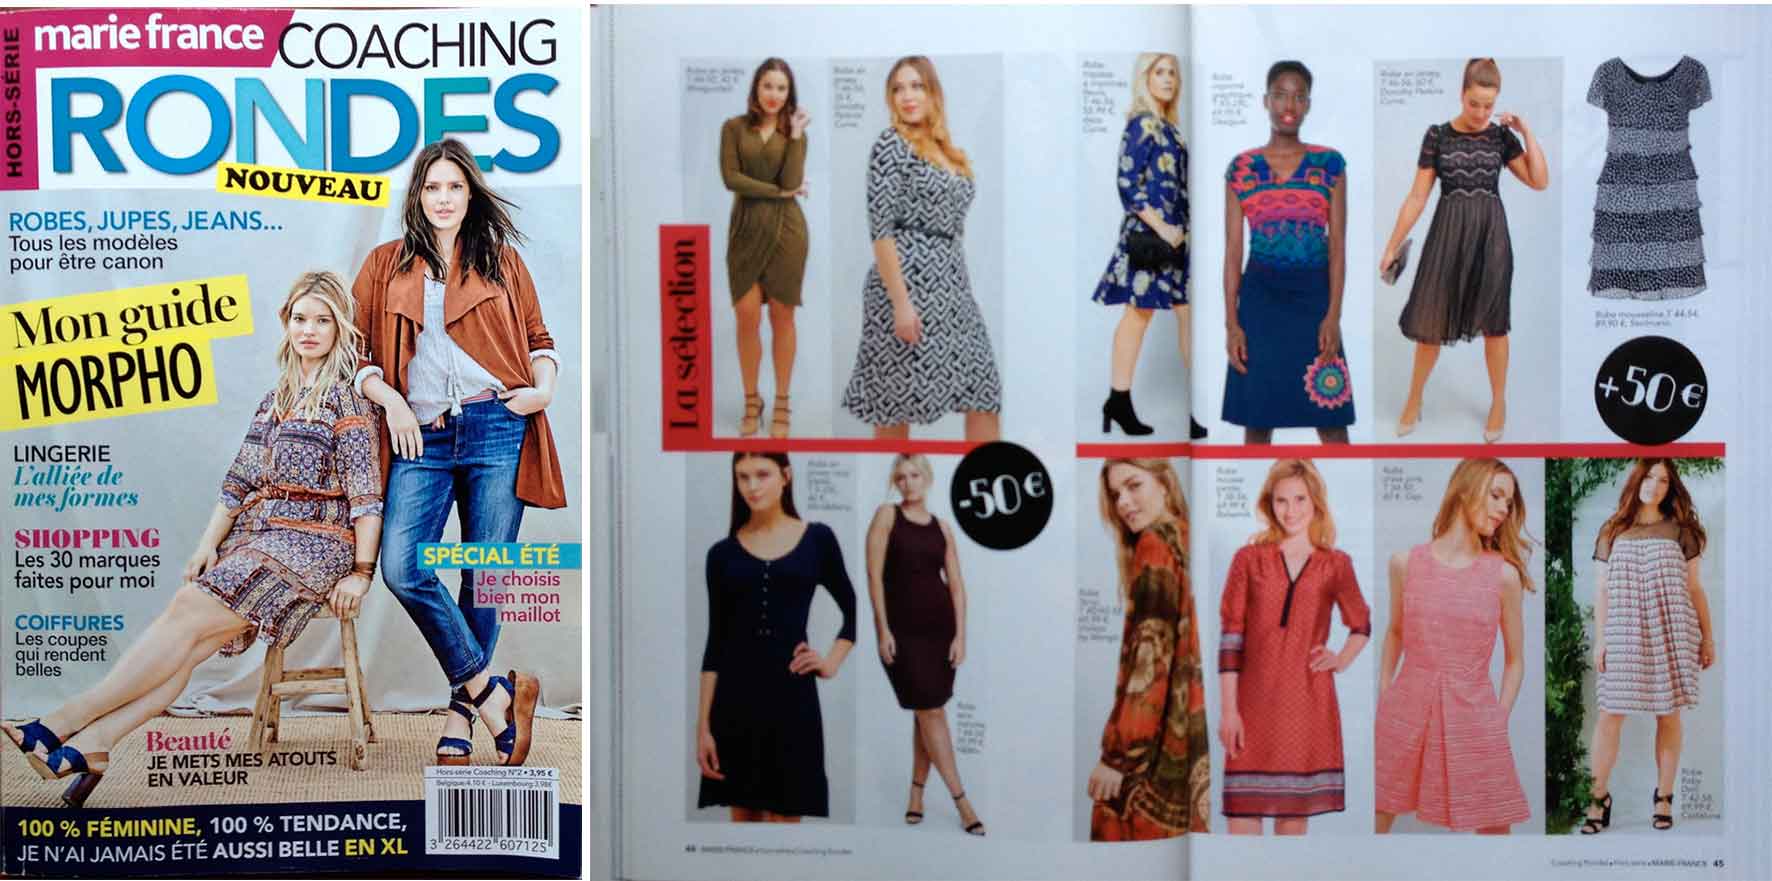 Left: Cover of Marie France Coaching Rondes. Right: 2 page spread showing larger sized models wearing dresses